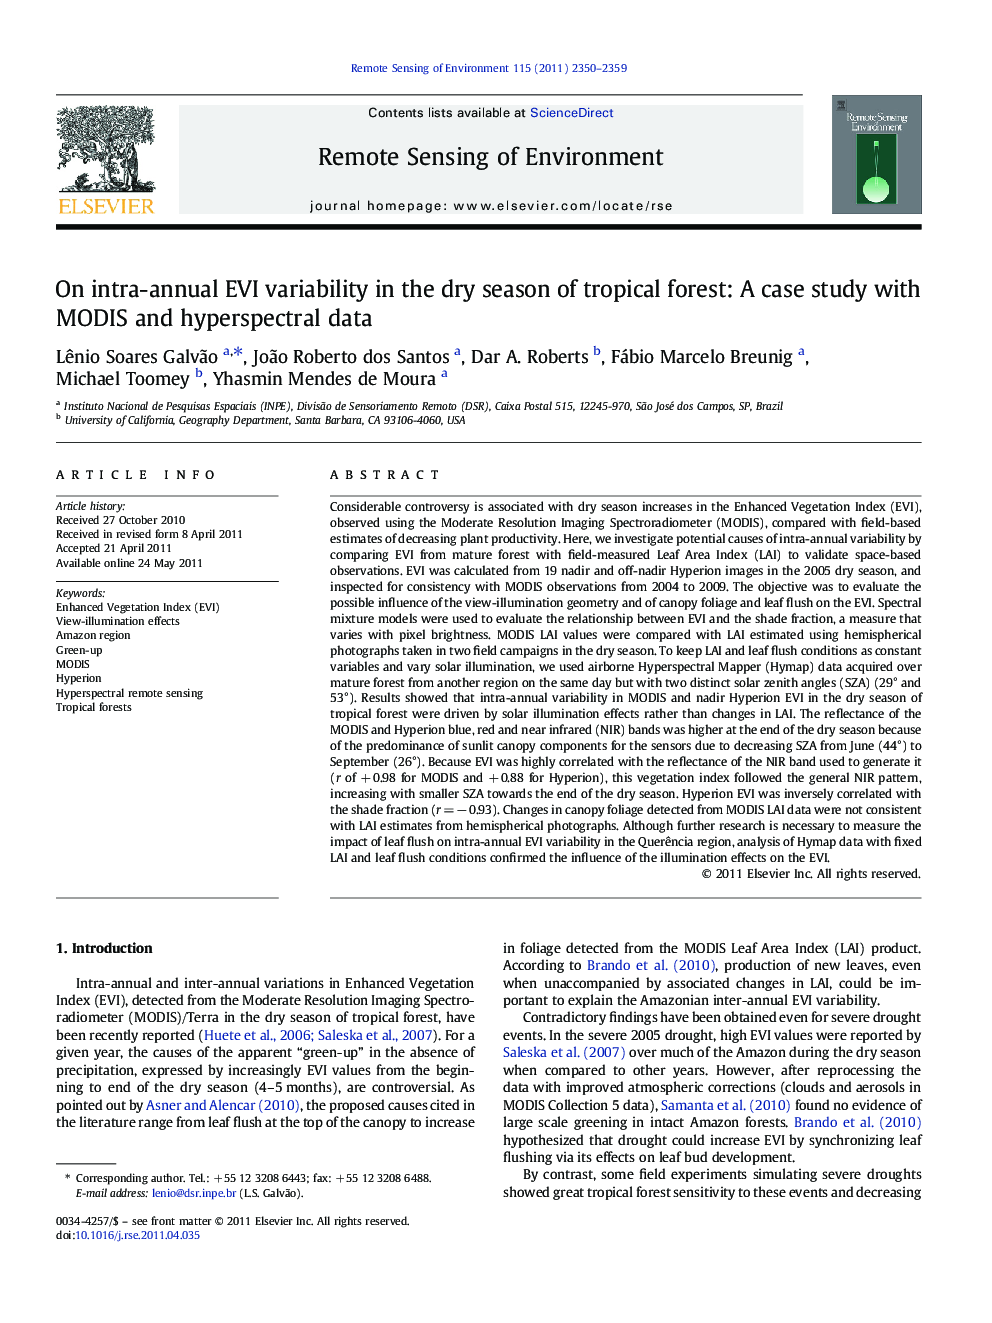 On intra-annual EVI variability in the dry season of tropical forest: A case study with MODIS and hyperspectral data